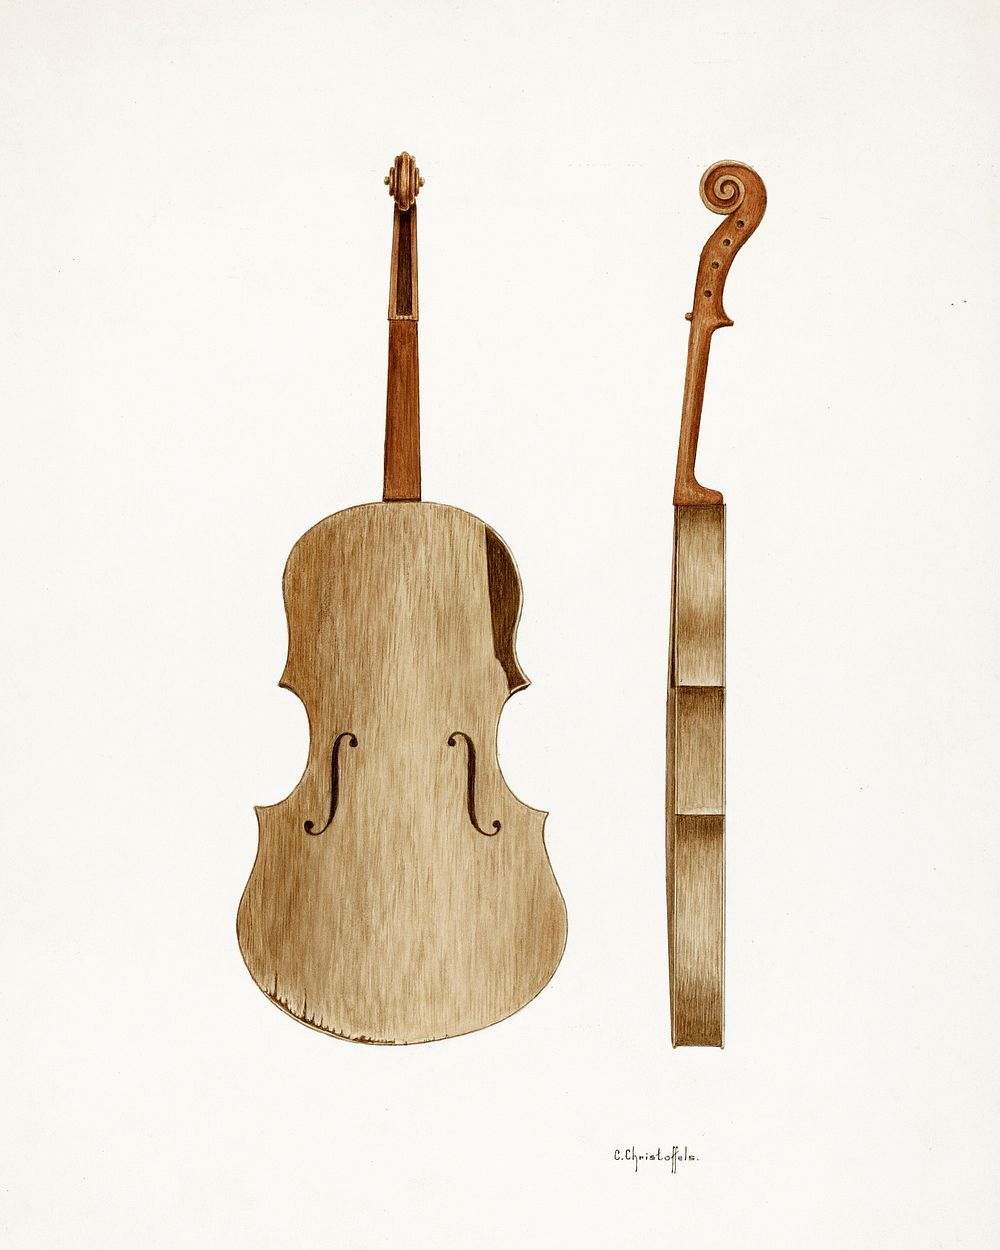 Violin (1941) by Cornelius Christoffels and Edward Jewett. Original from The National Gallery of Art. Digitally enhanced by…